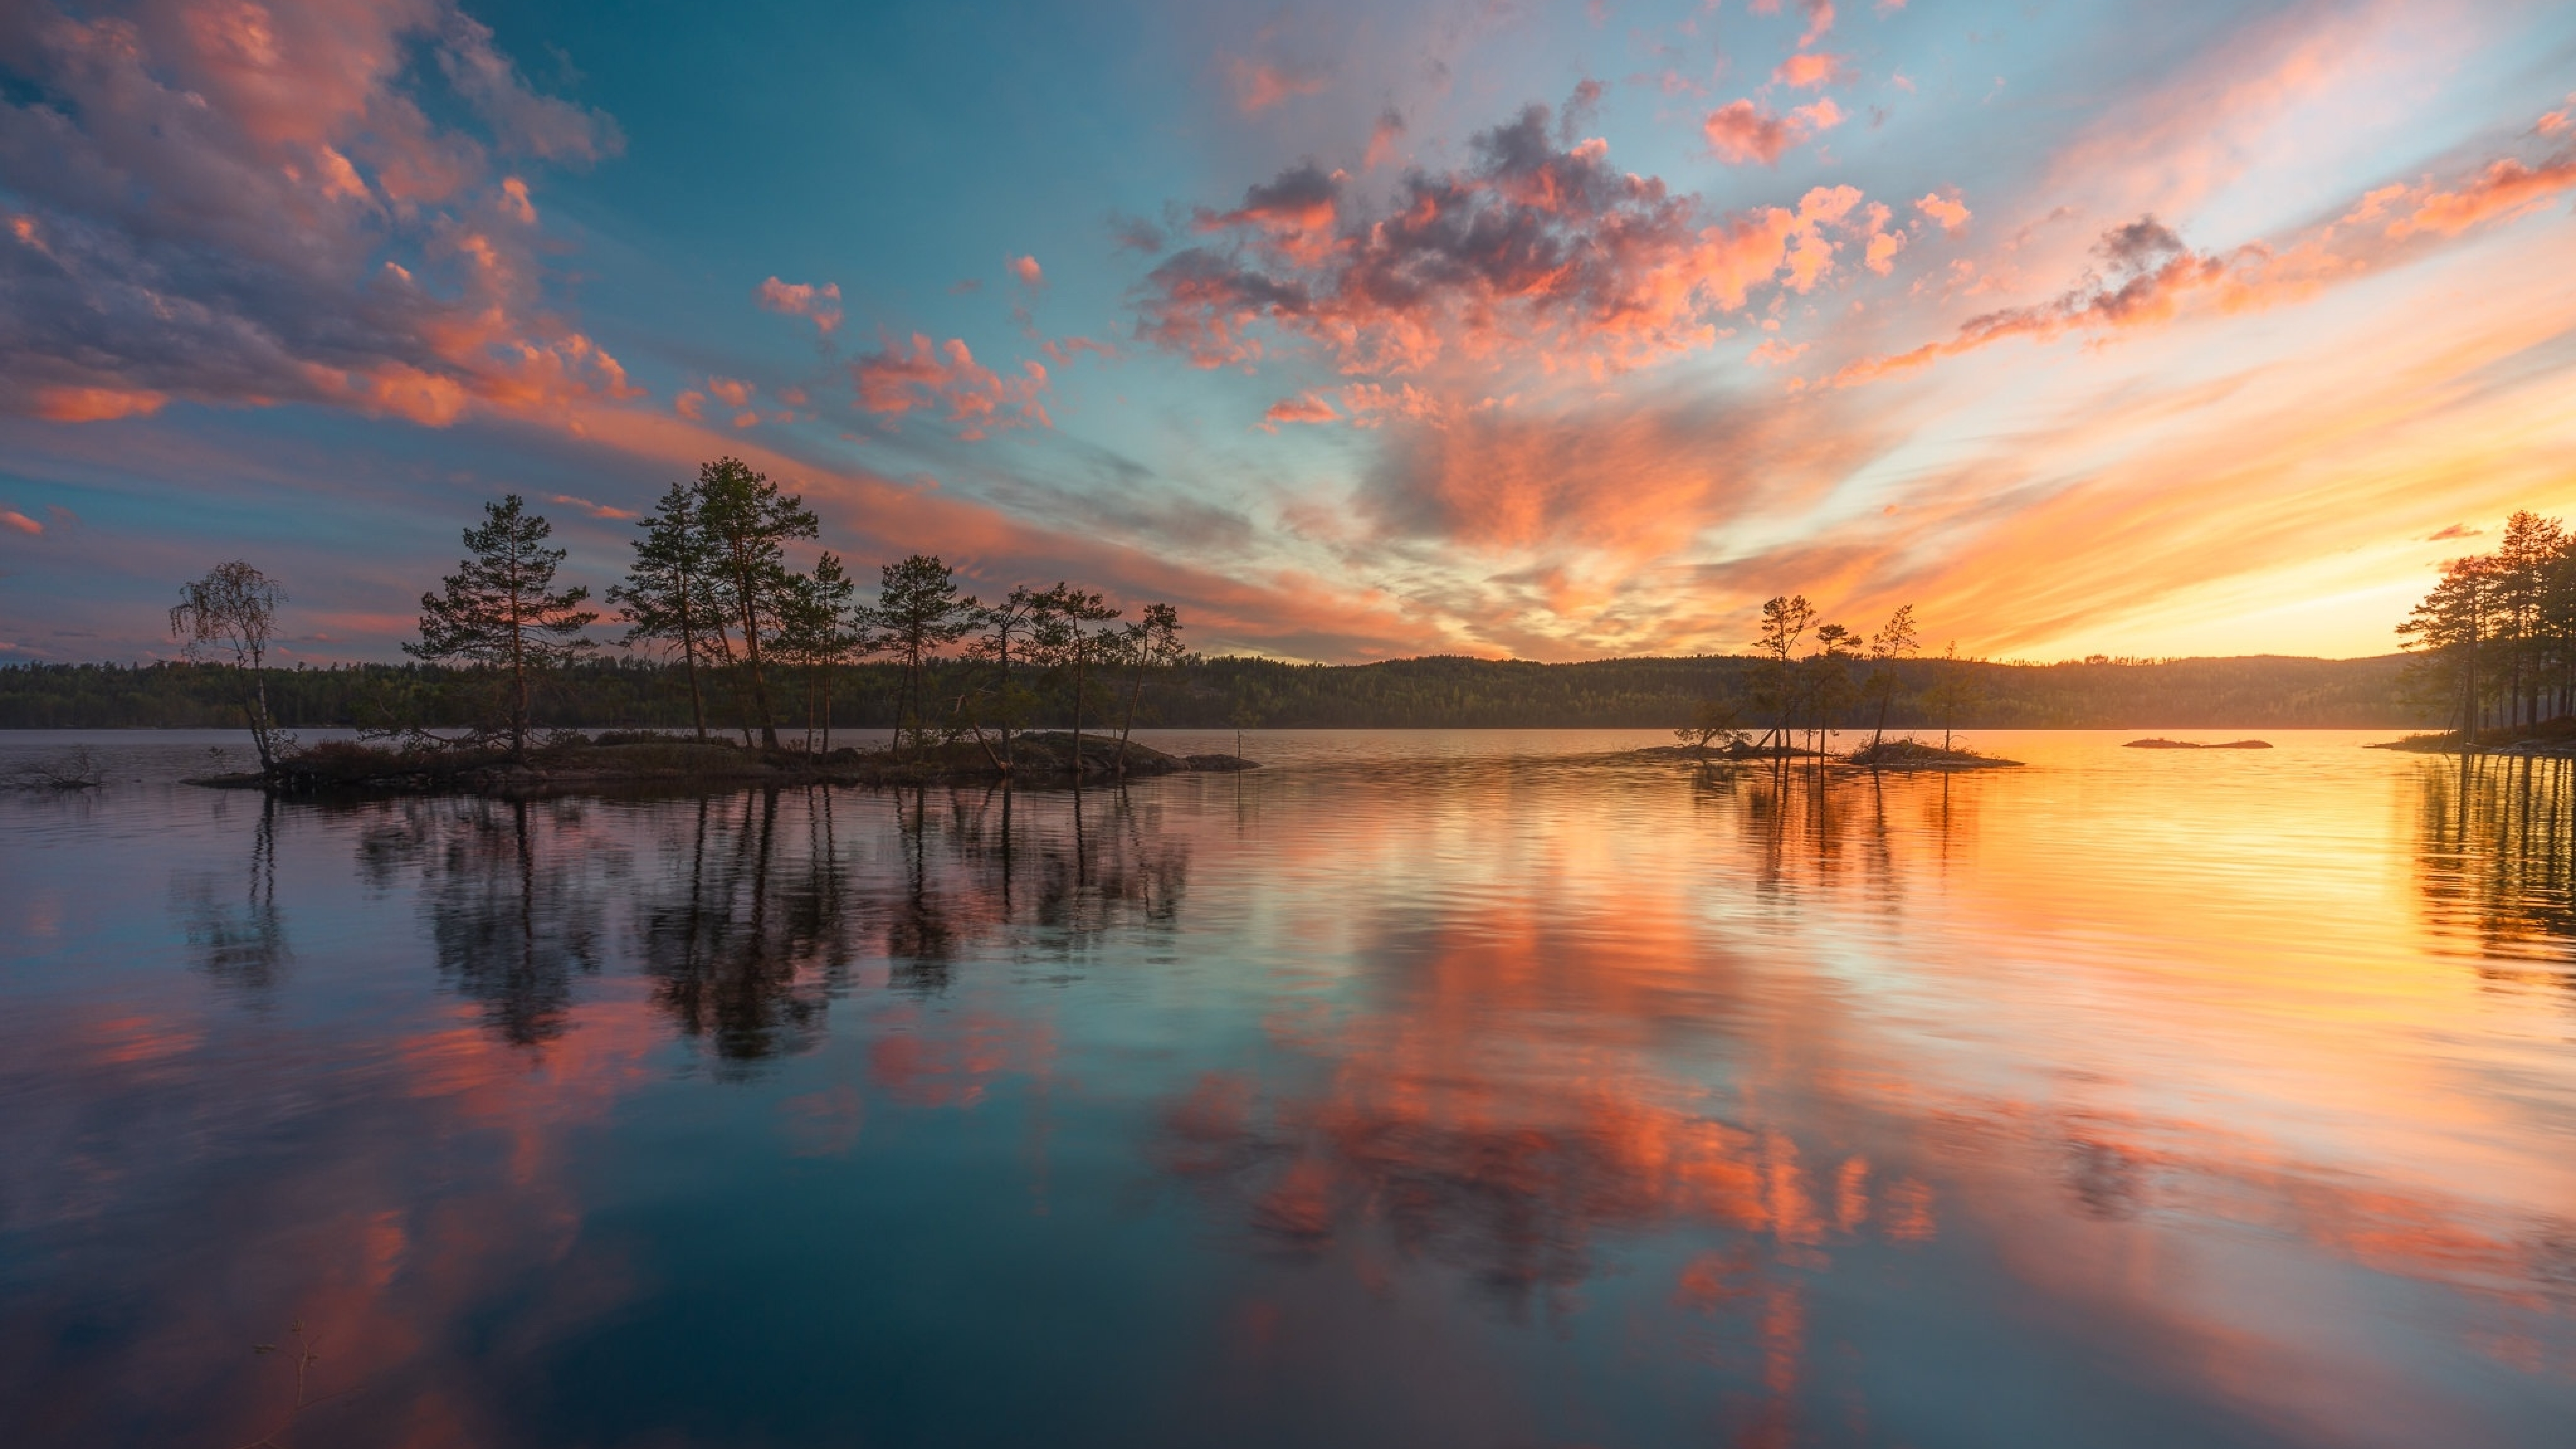 7680x4320 Sunset Clouds Reflection In Lake 8k 8K ,HD 4k Wallpapers